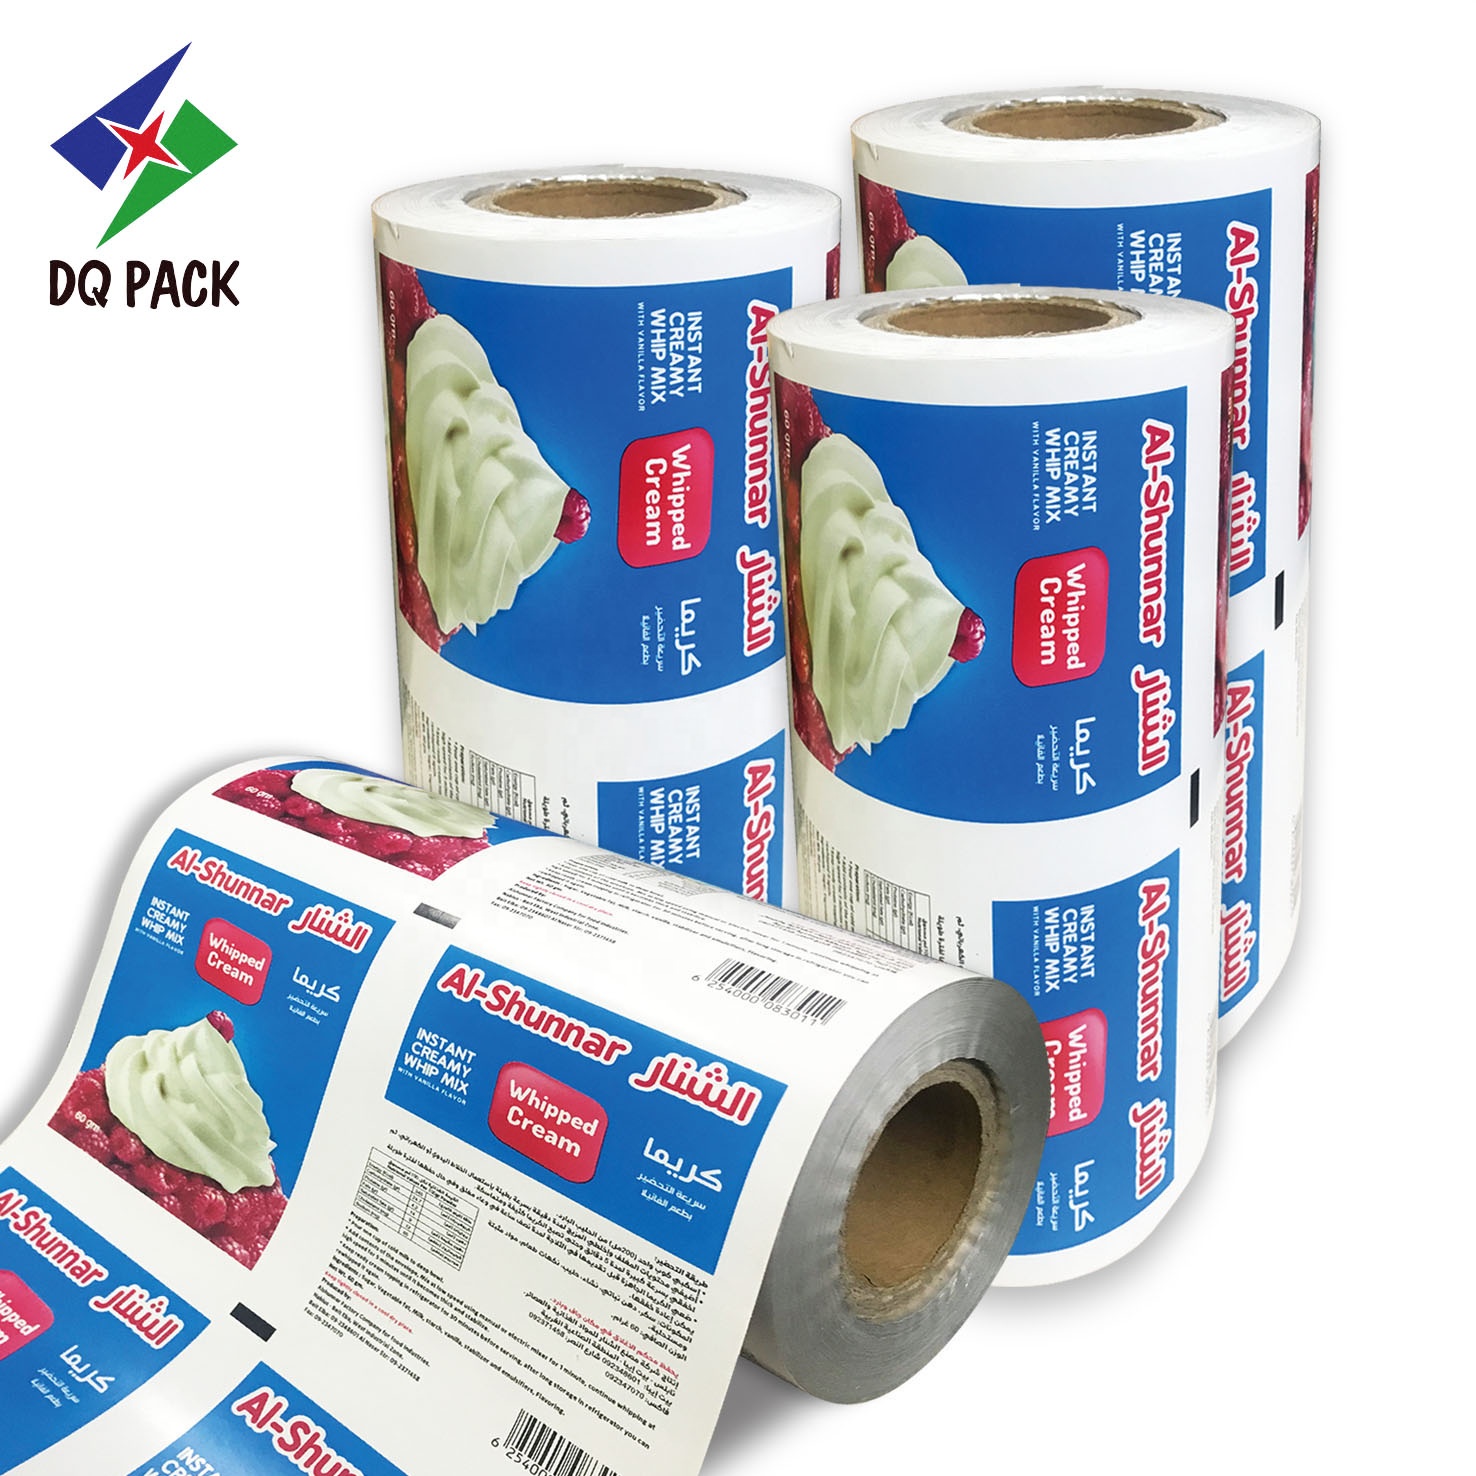 DQ PACK Custom Printed BOPP/CPP Ice Cream Popsicle Packaging Film Laminating Metalized Aluminized Film Roll